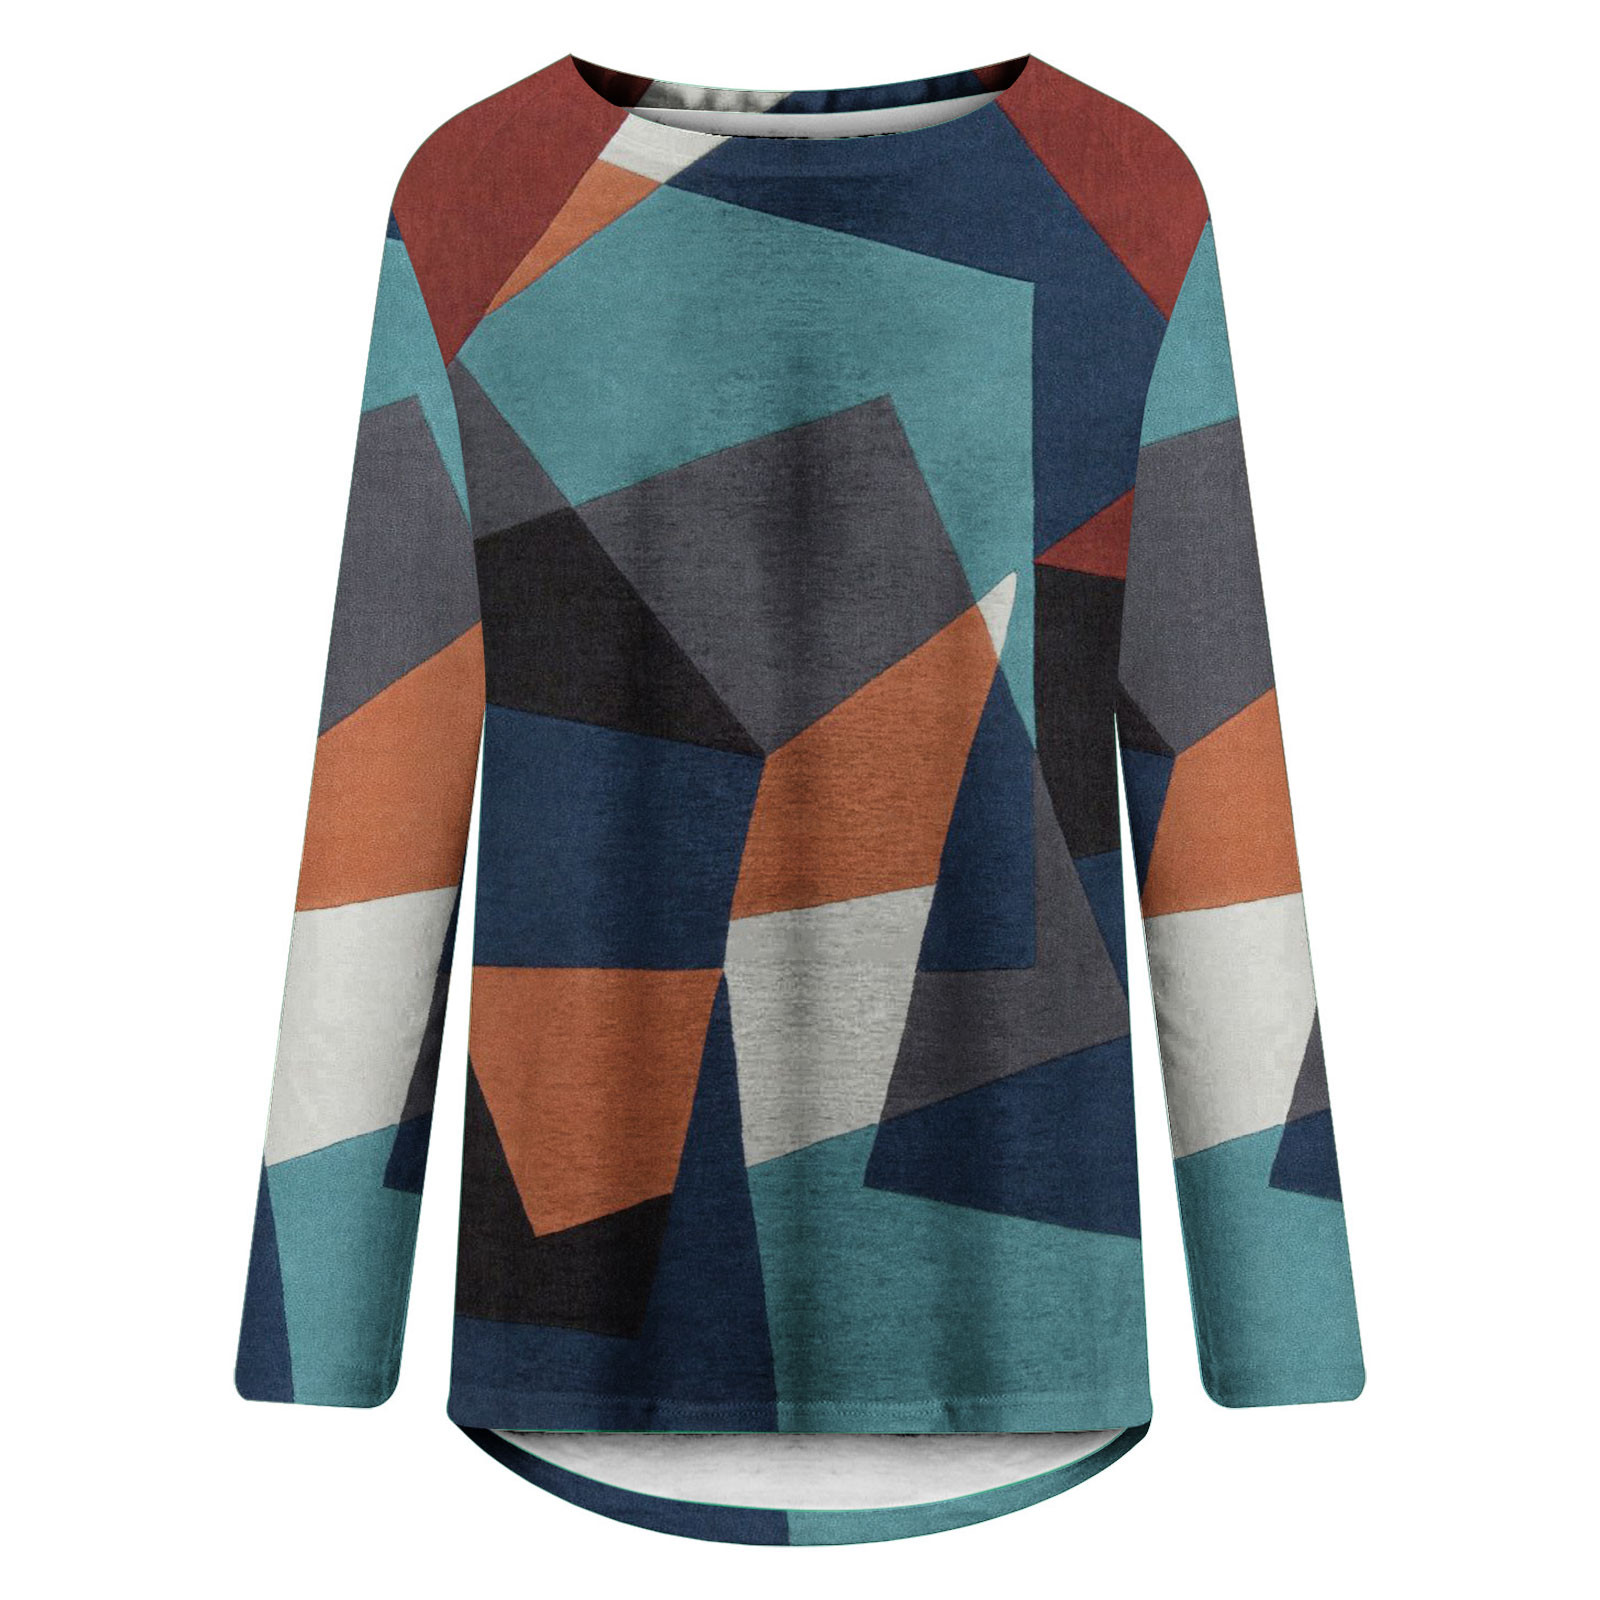 2023 Clearance Womens Tops Fashion Casual Socket Geometry Printed Long Sleeve Round-Neck Tops - image 4 of 4